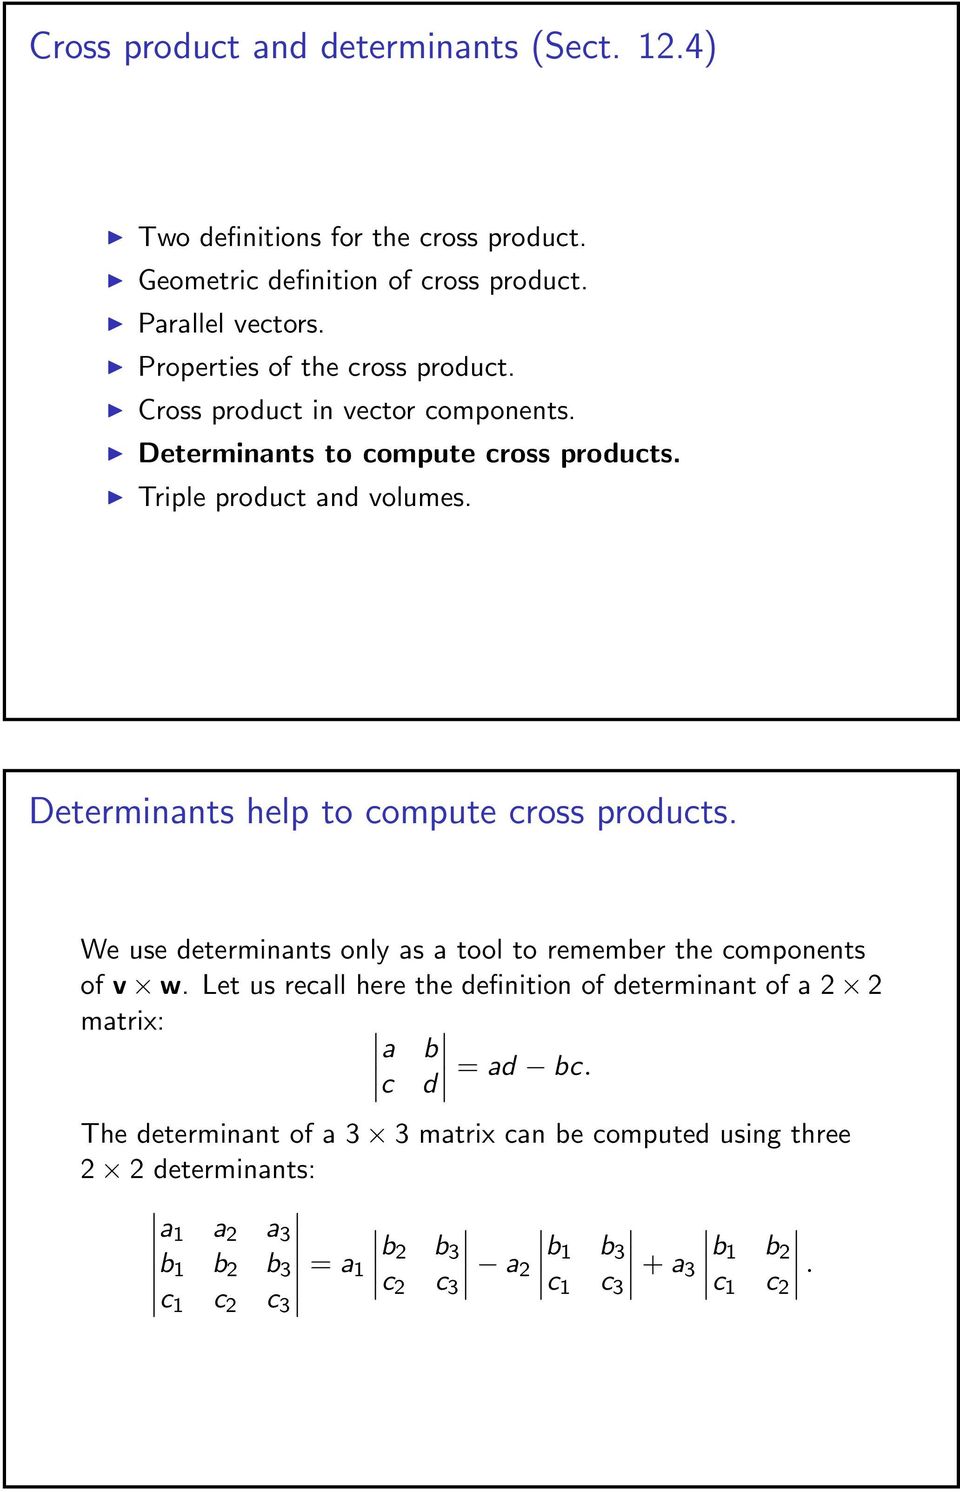 Determinants help to compute cross products. e use determinants only as a tool to remember the components of v w.